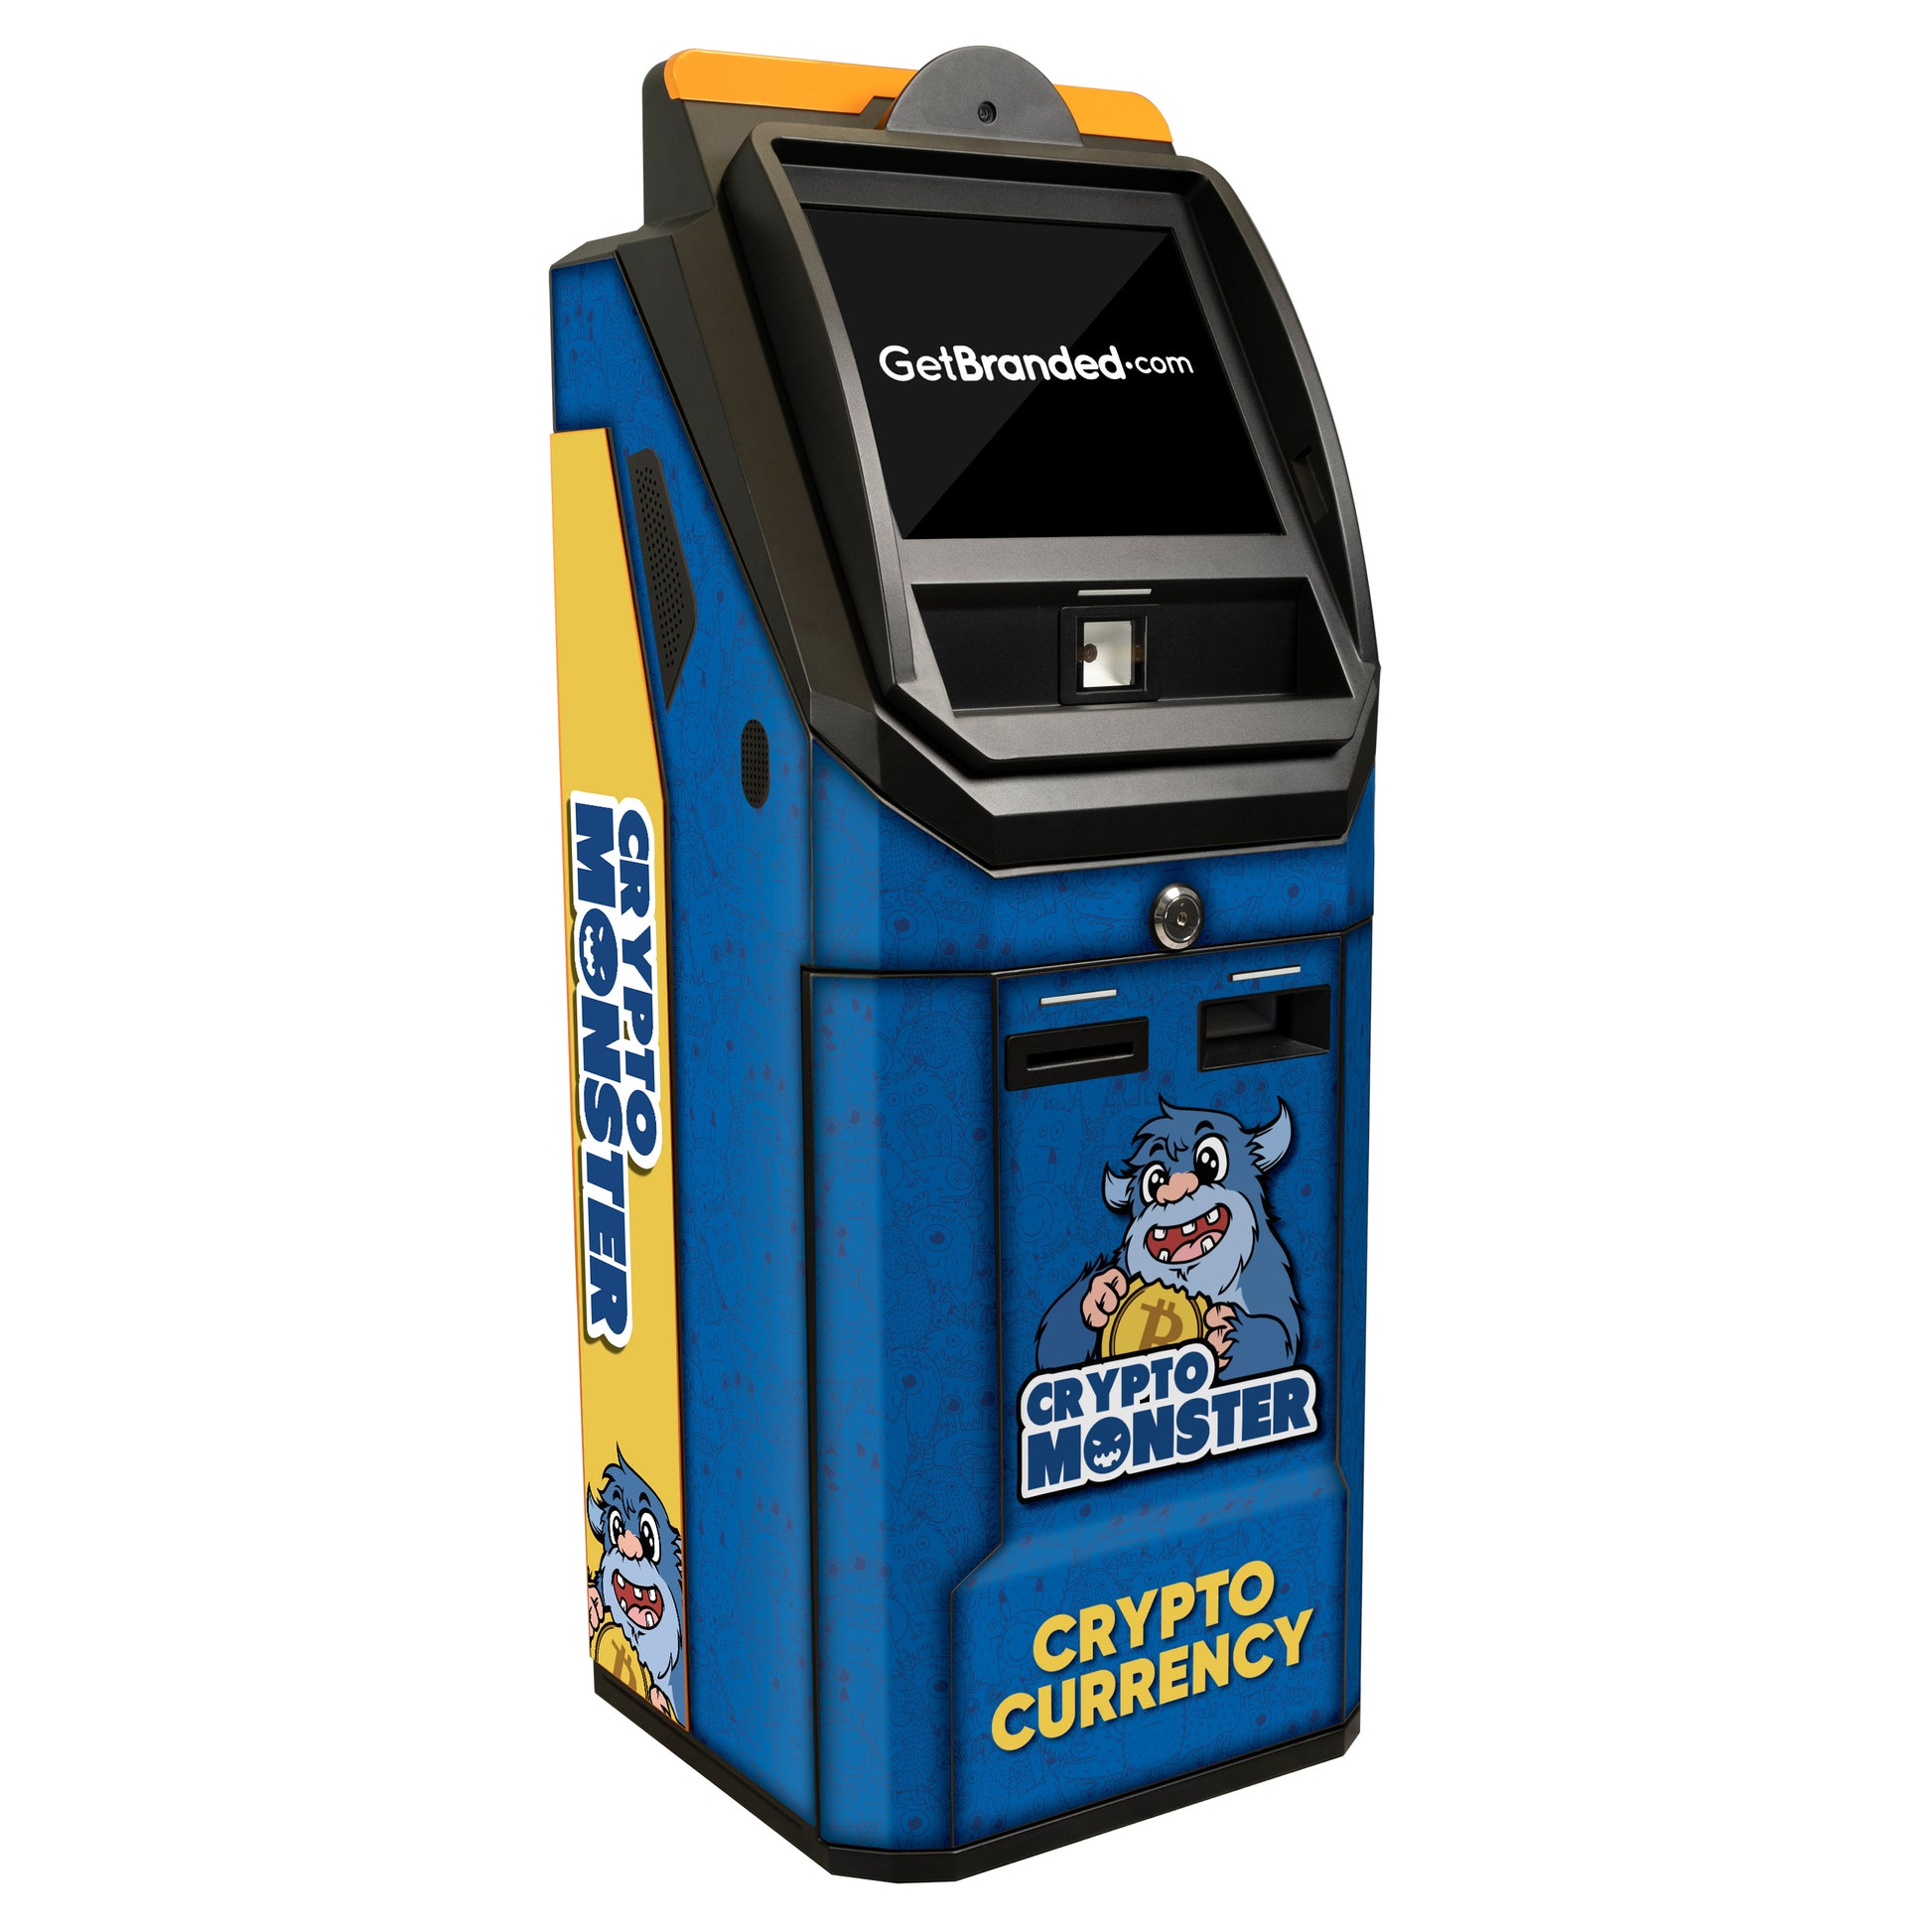 Chainbytes Universal 2-Way Bitcoin ATM Wrap (Model: 502) Rendering.